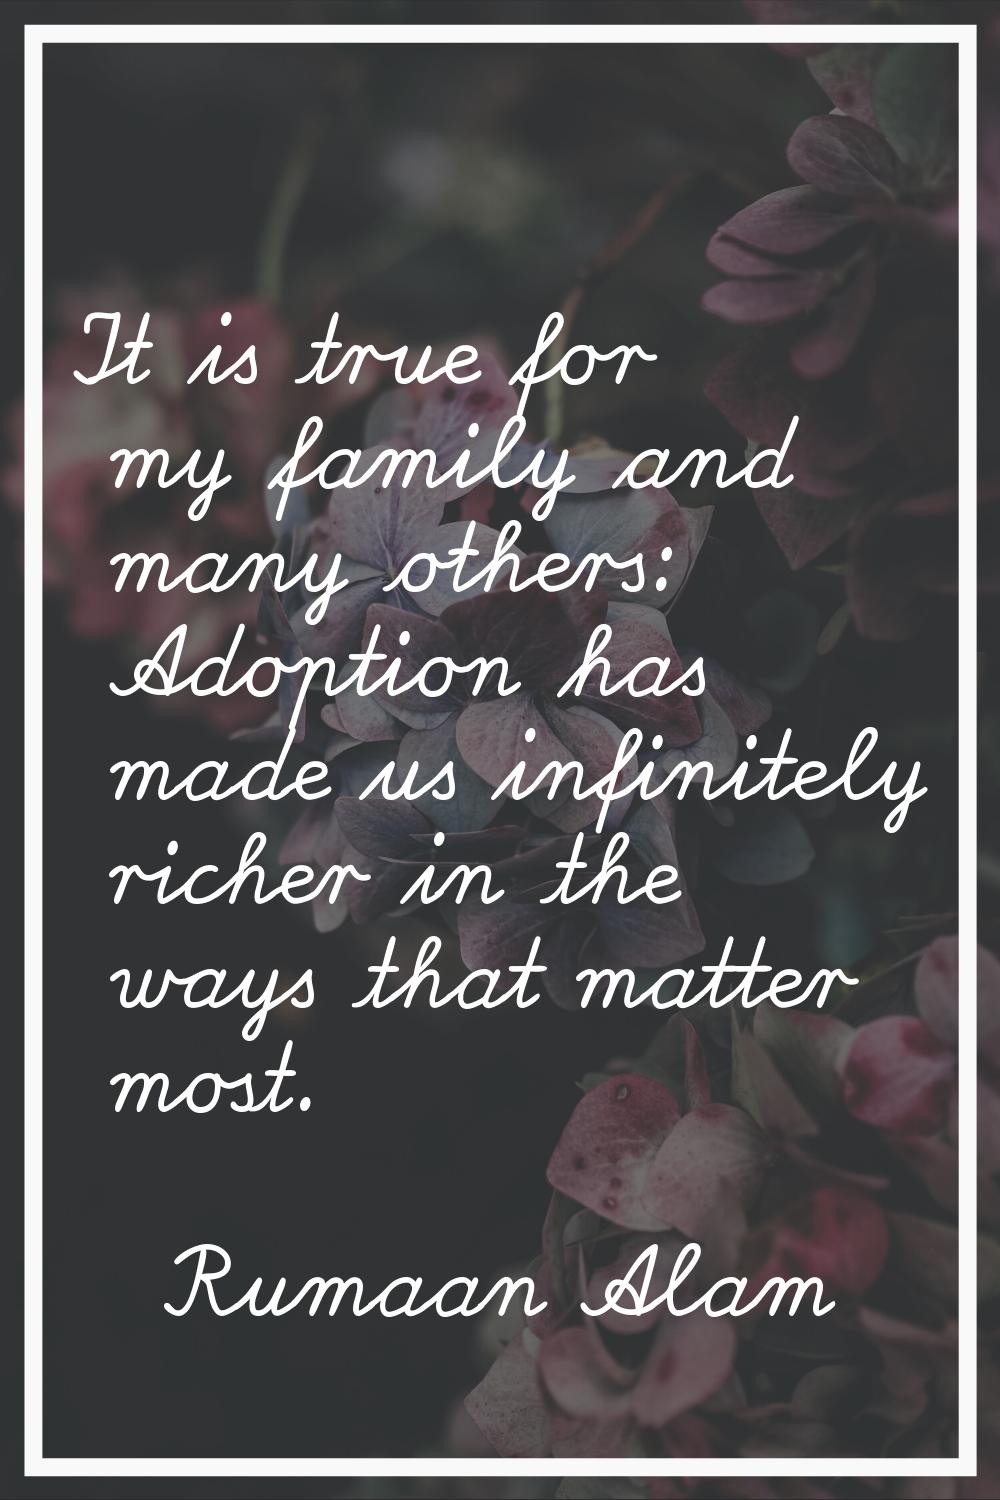 It is true for my family and many others: Adoption has made us infinitely richer in the ways that m